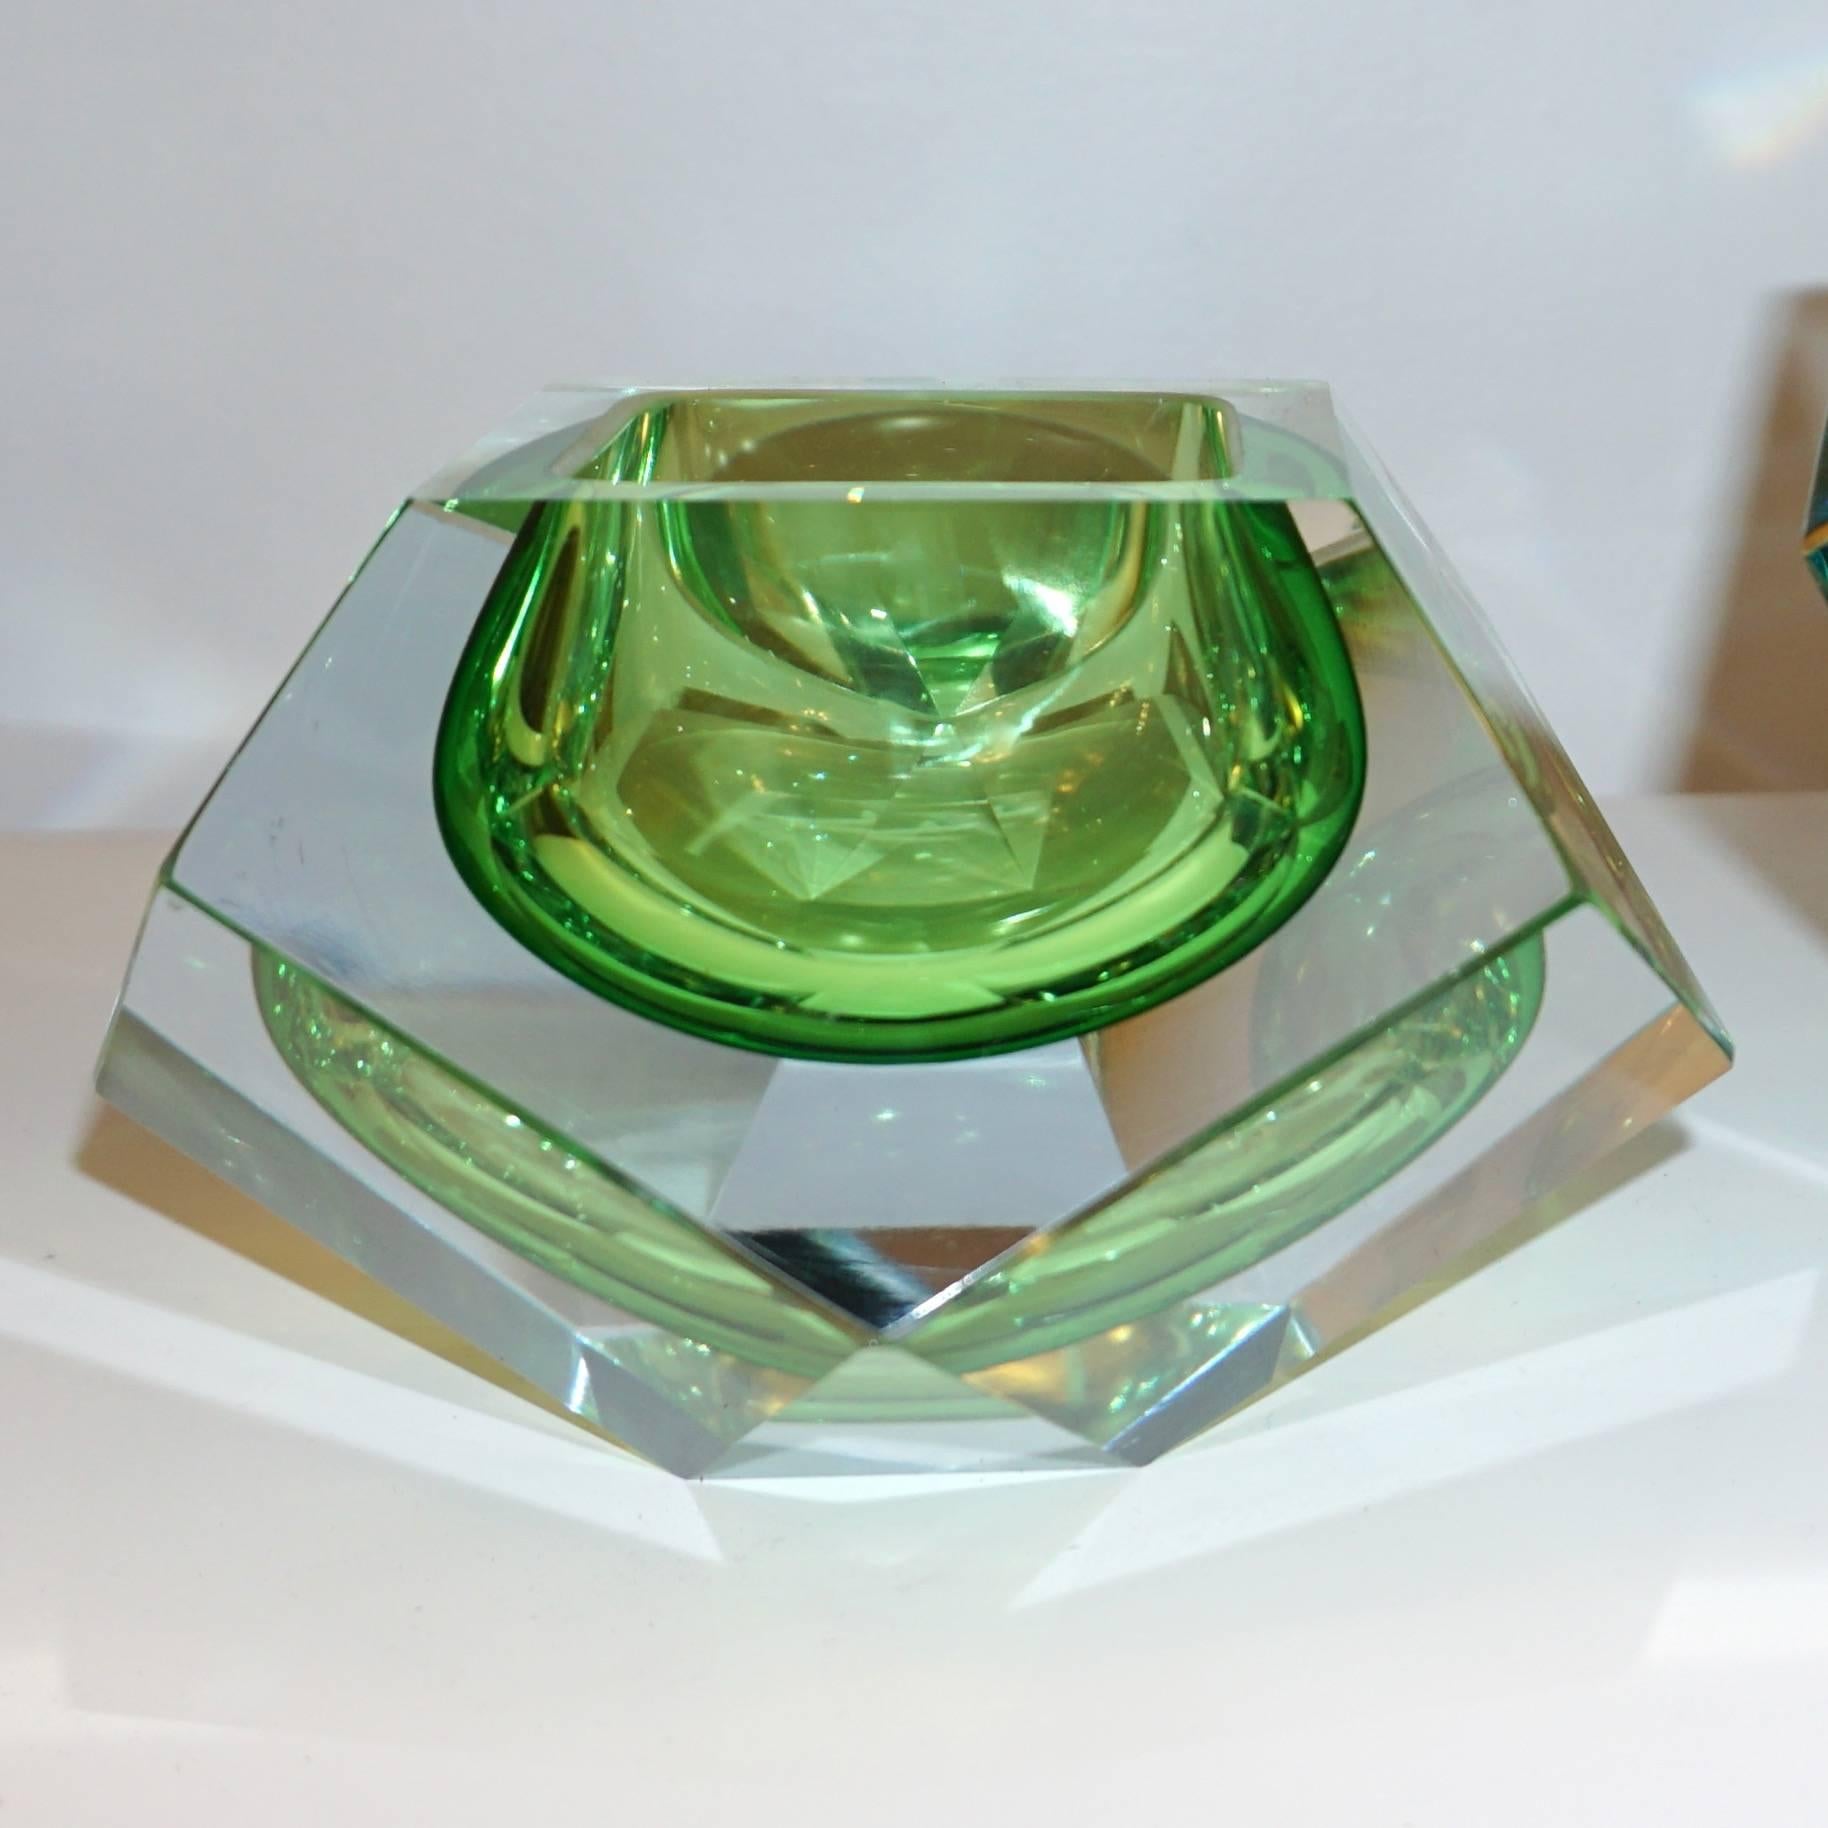 1950s Italian diamond faceted art glass catchall / paperweight of modern design by Seguso in hand-cut Murano glass, a very decorative bowl with a diamond multifaceted exterior which catches the light like a prism. This piece has a flat cut polished